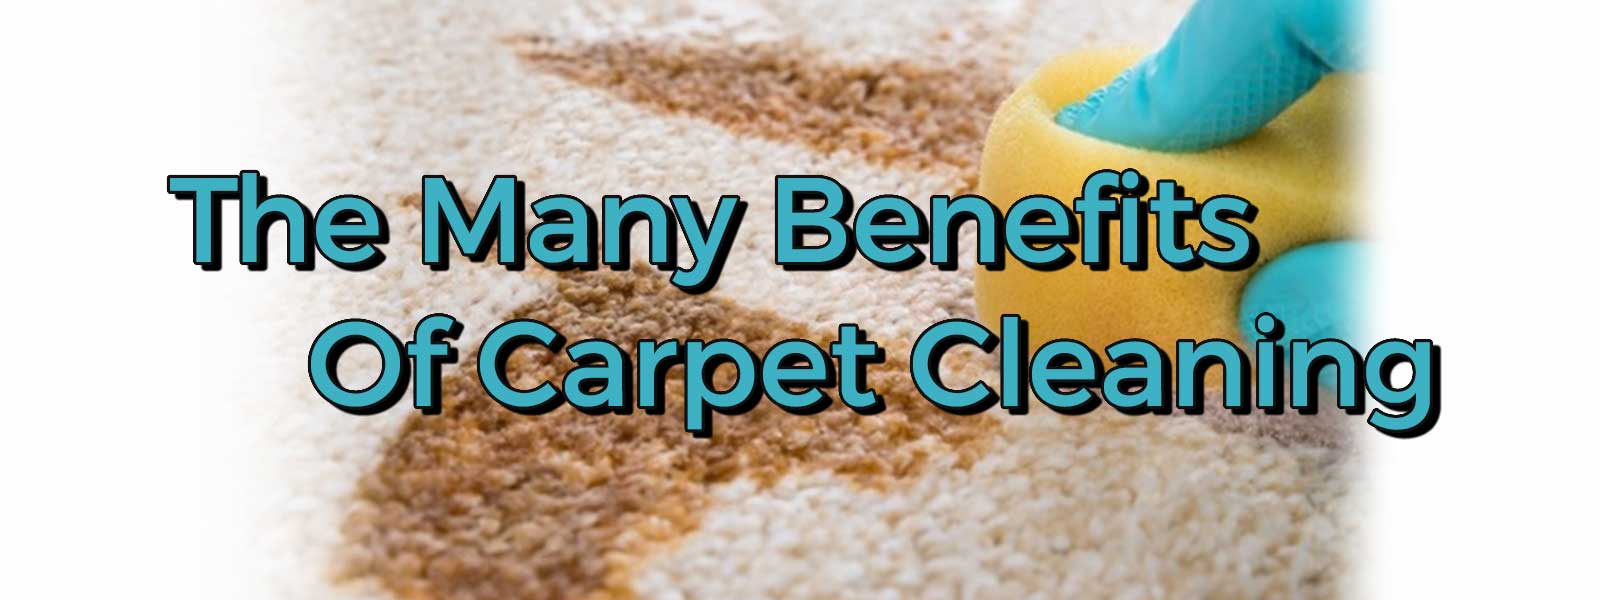 benefits-of-carpet-cleaning-gold-coast-flooring-has-to-offer